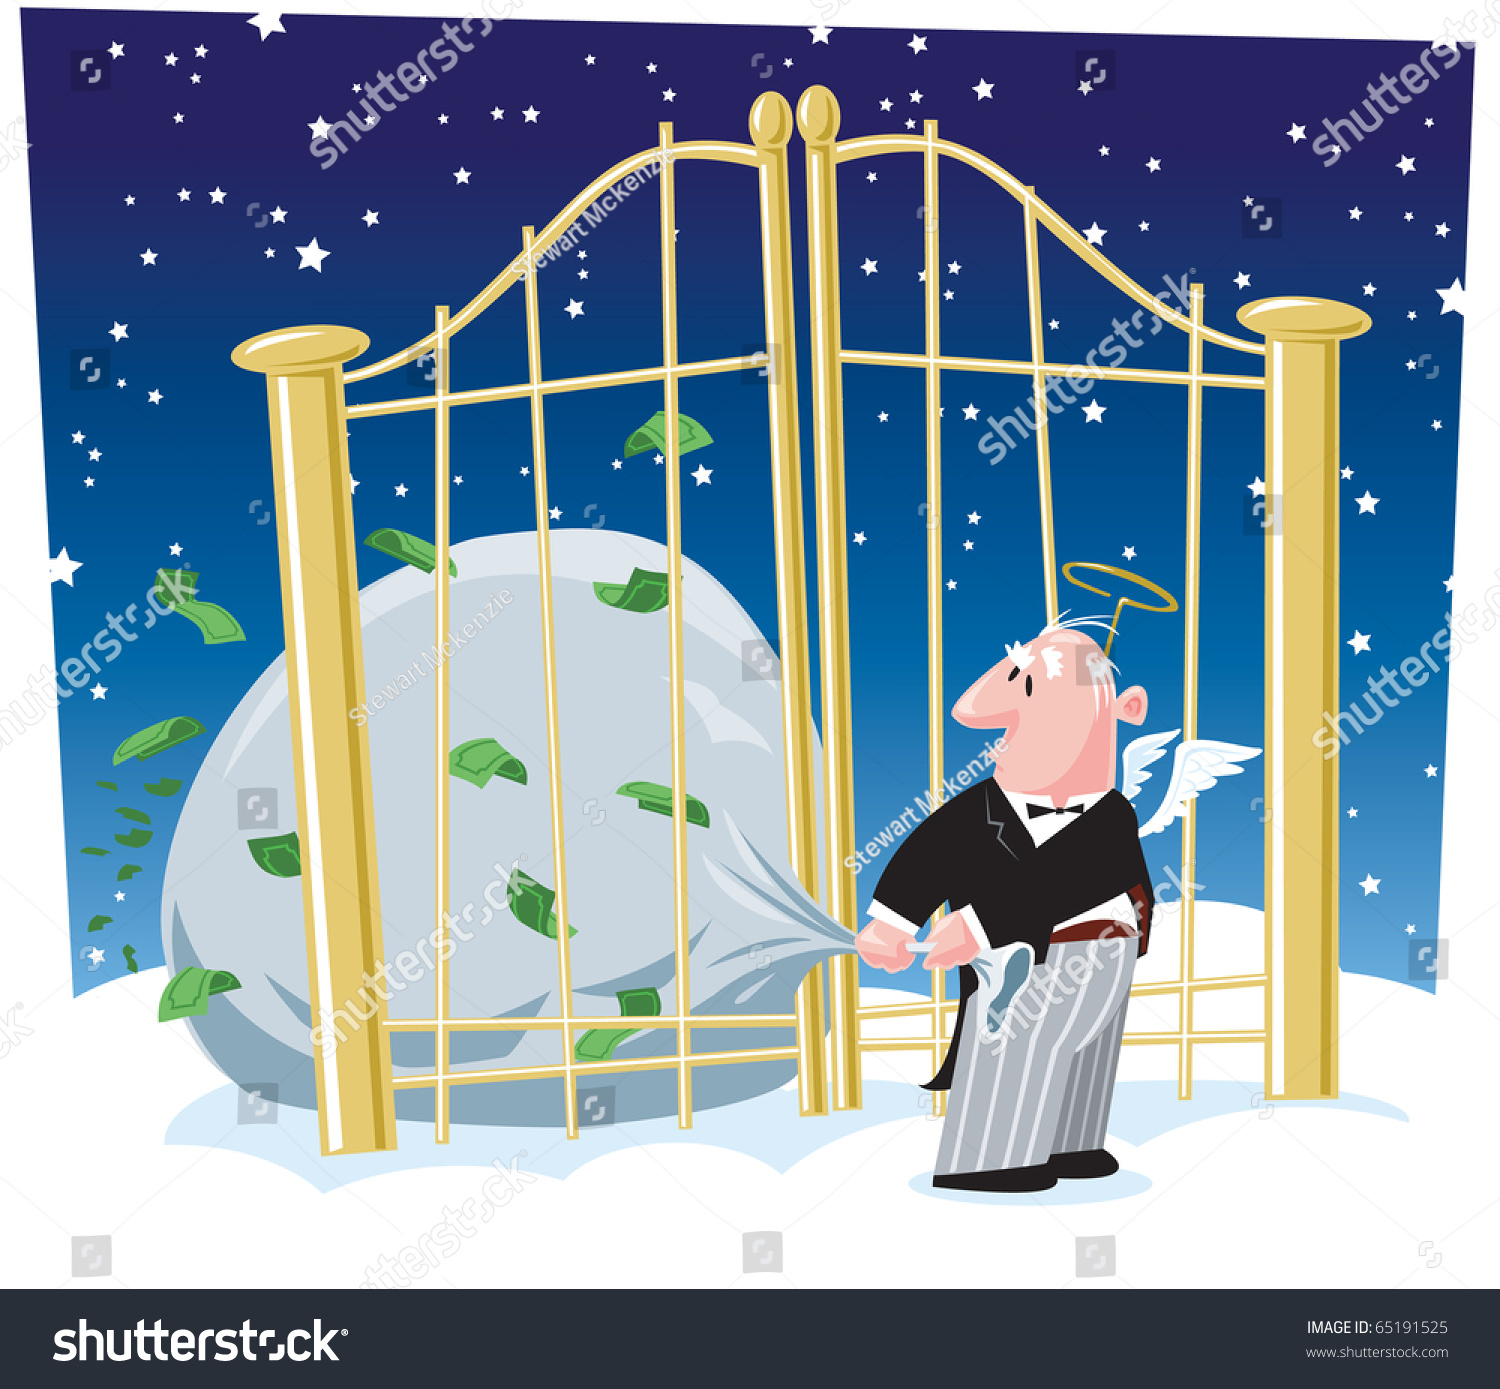 pearly gates clipart - photo #7